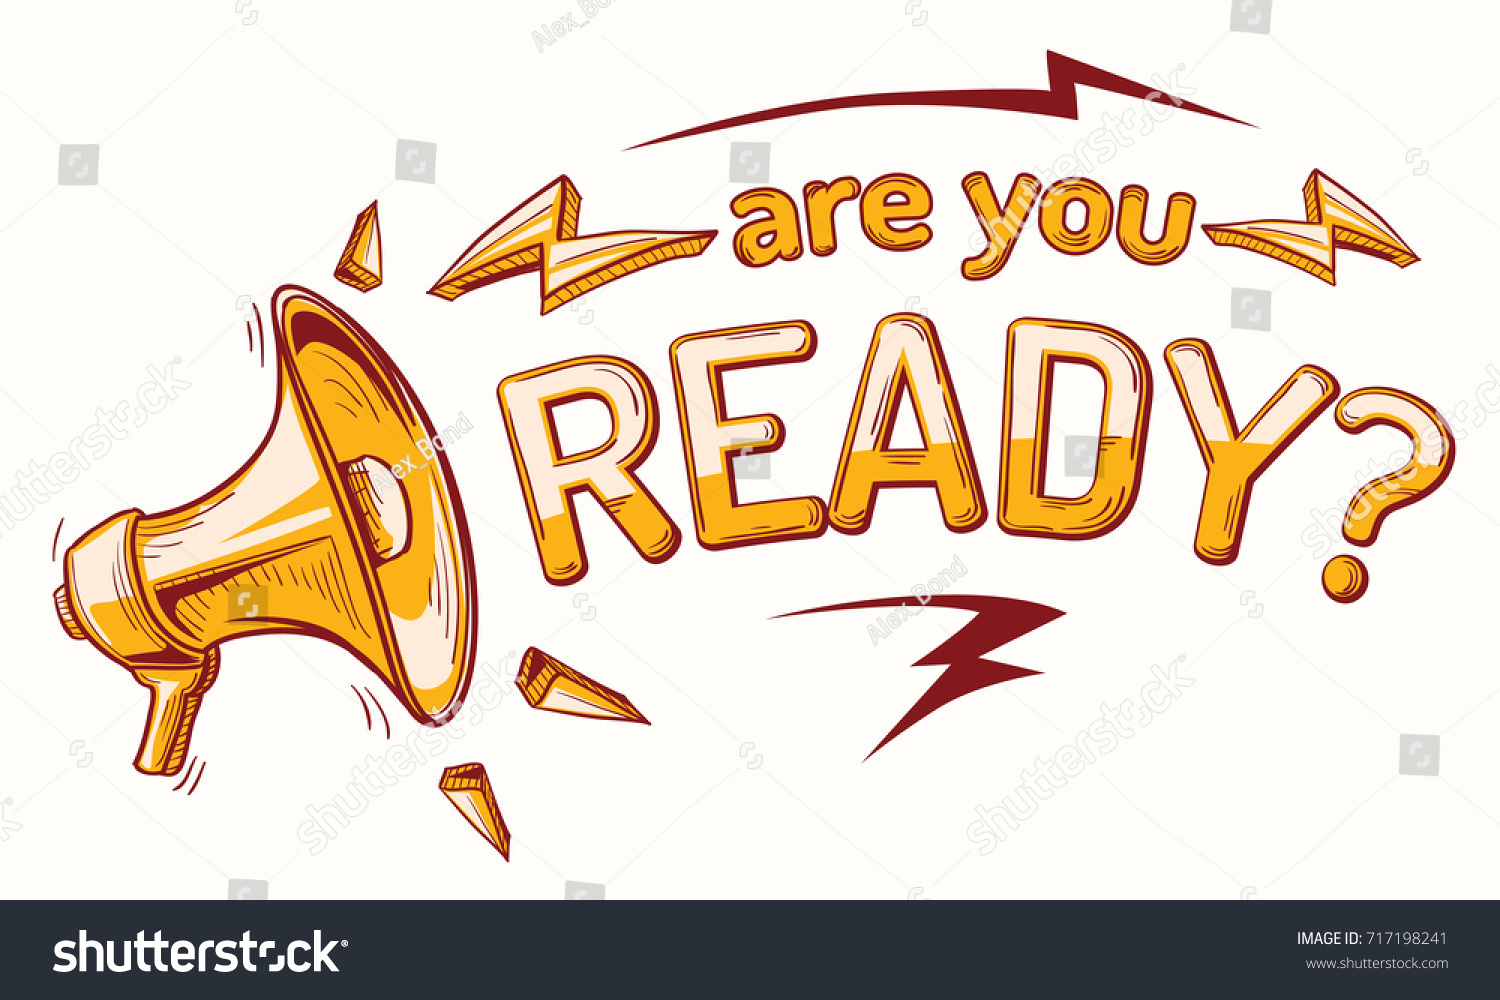 Are you ready to order. Are you ready. A you ready. I'M ready Clipart.